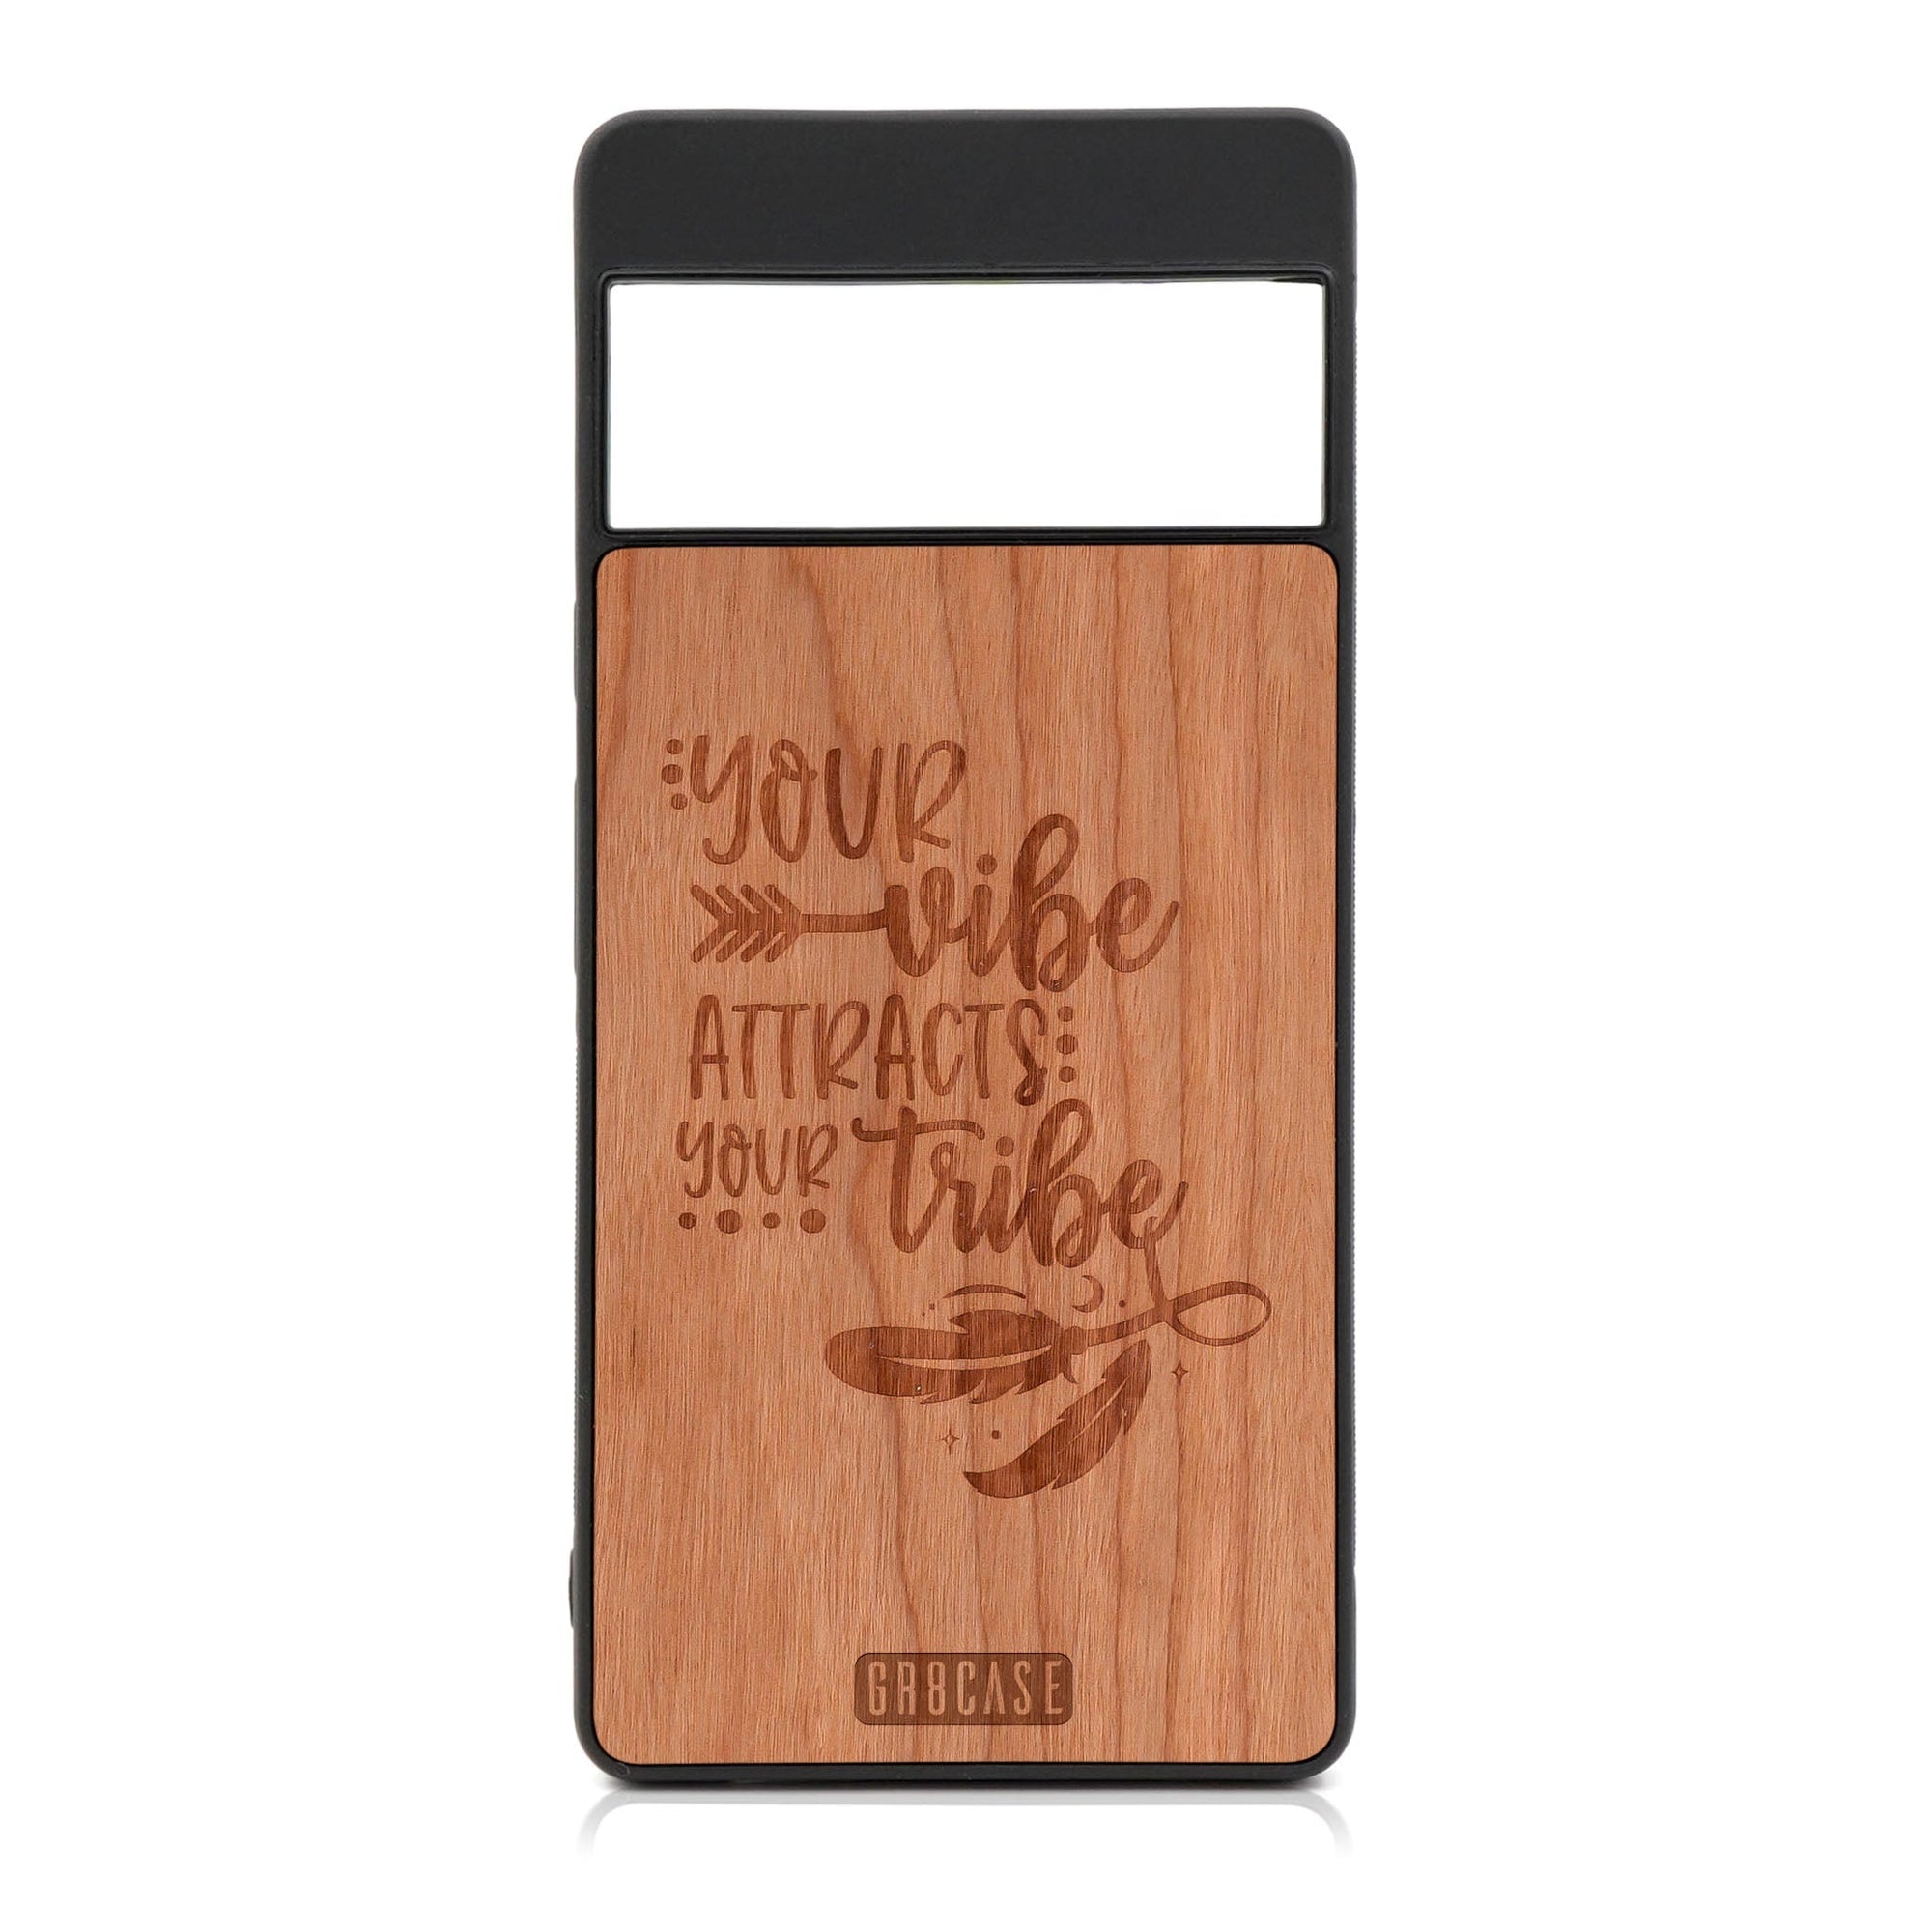 Your Vibe Attracts Your Tribe Design Wood Case For Google Pixel 7 Pro